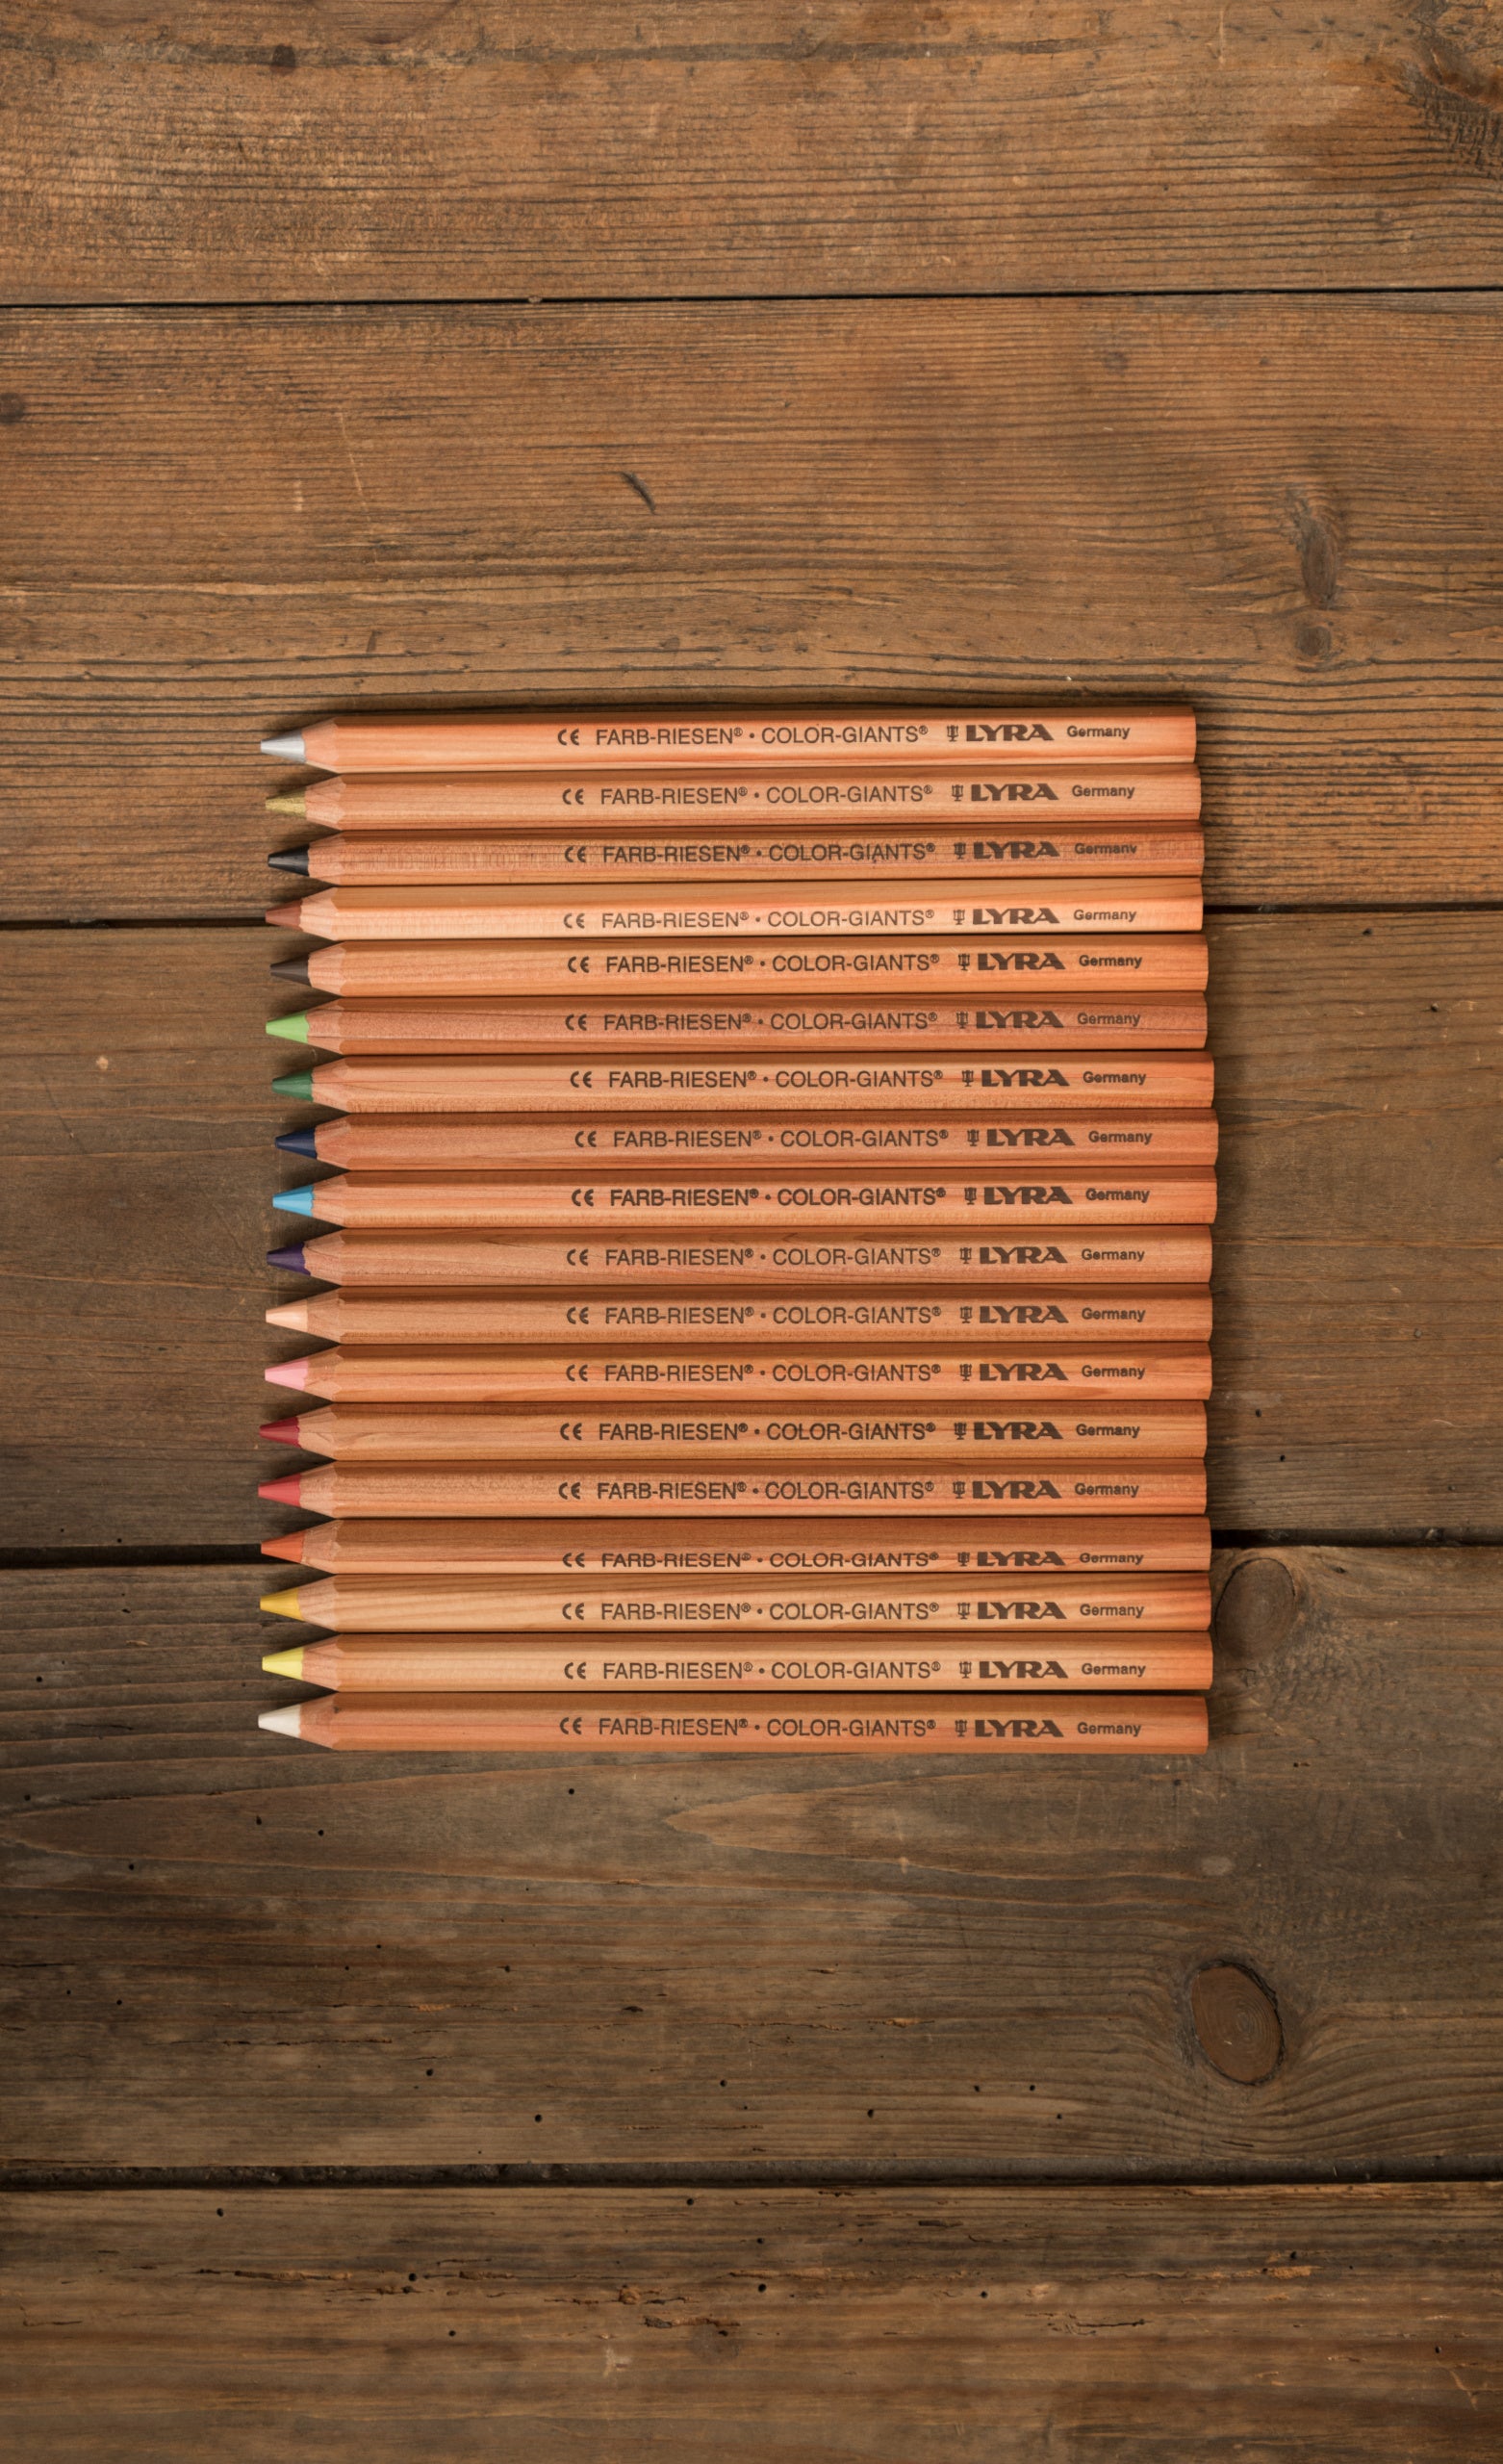 Lyra Color Giants Unlacquered Pencils - 12 Assorted Colors